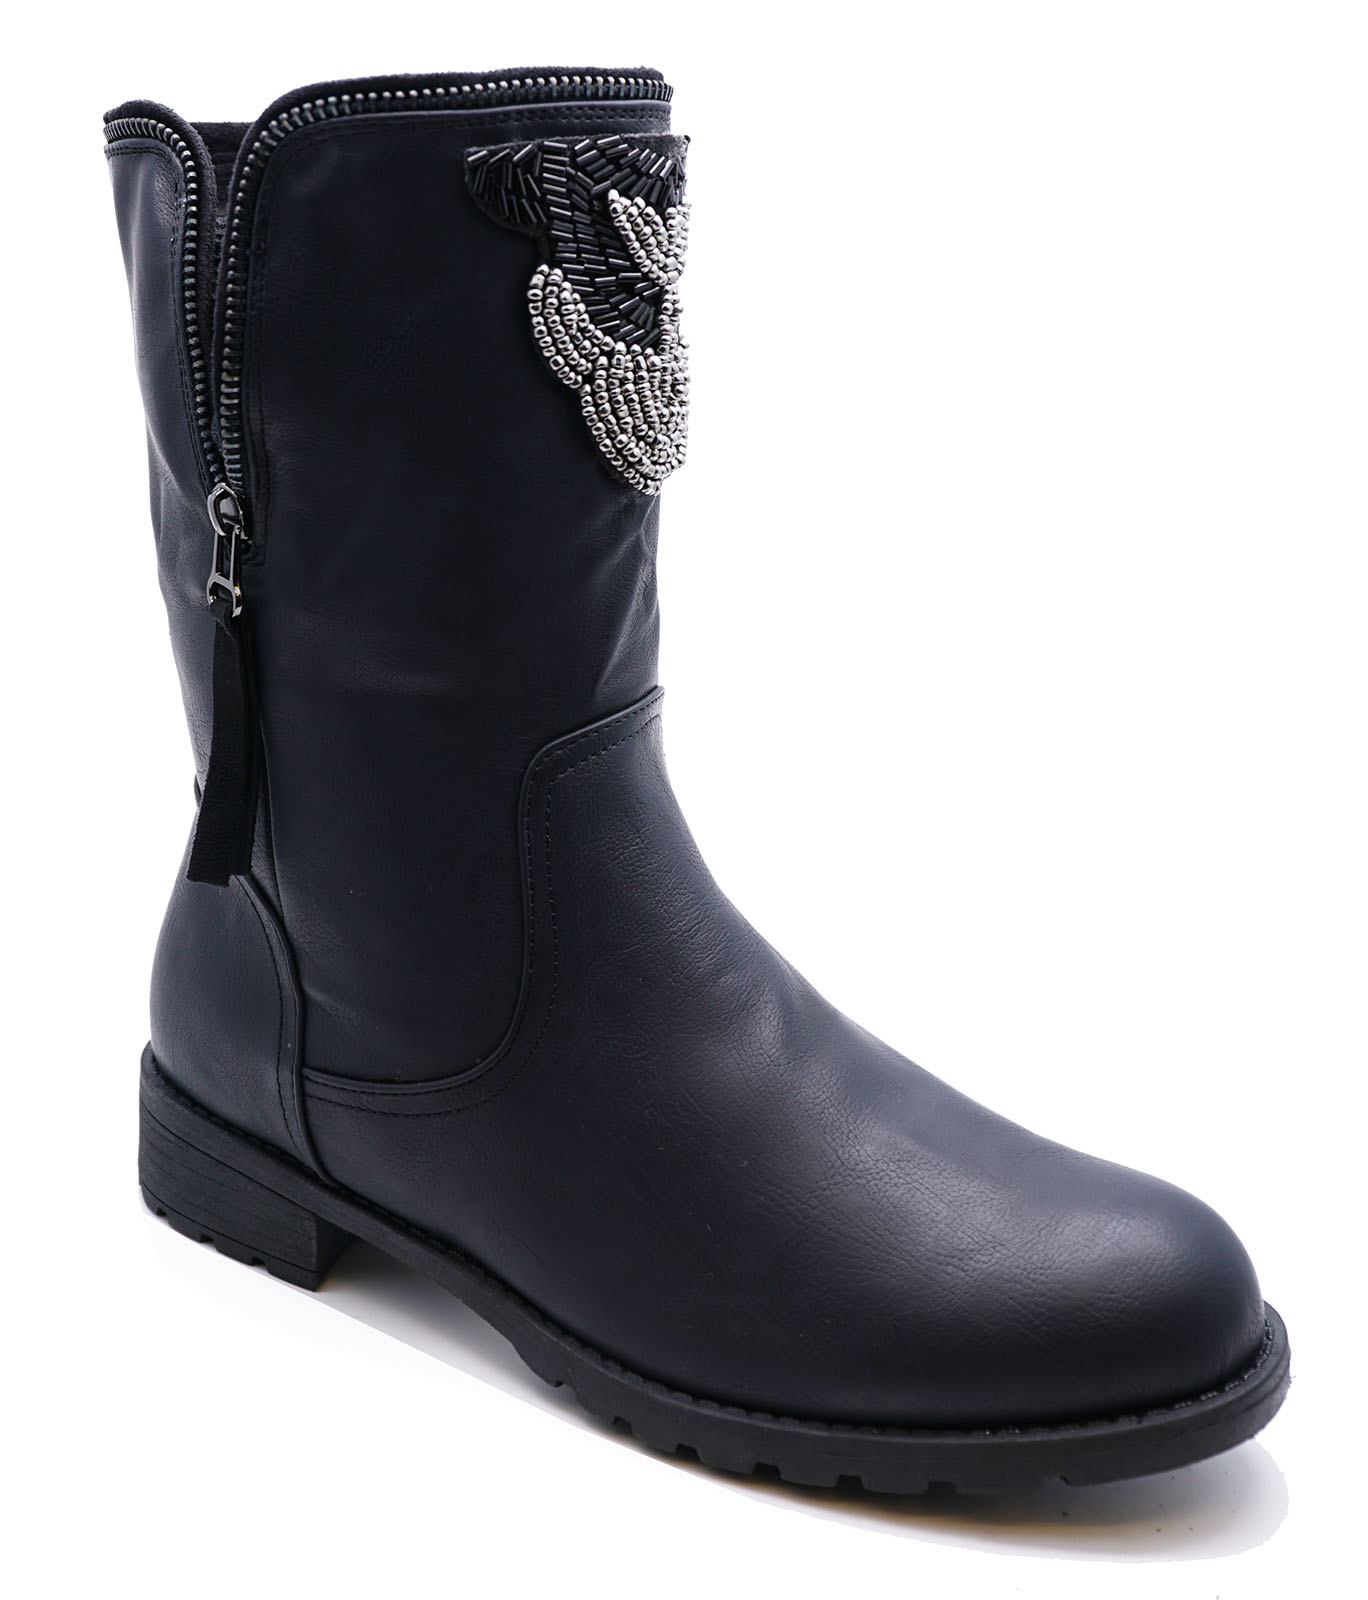 LADIES BLACK SLOUCH ANKLE BIKER FLAT COMFY CASUAL ROCK-CHICK BOOTS ...